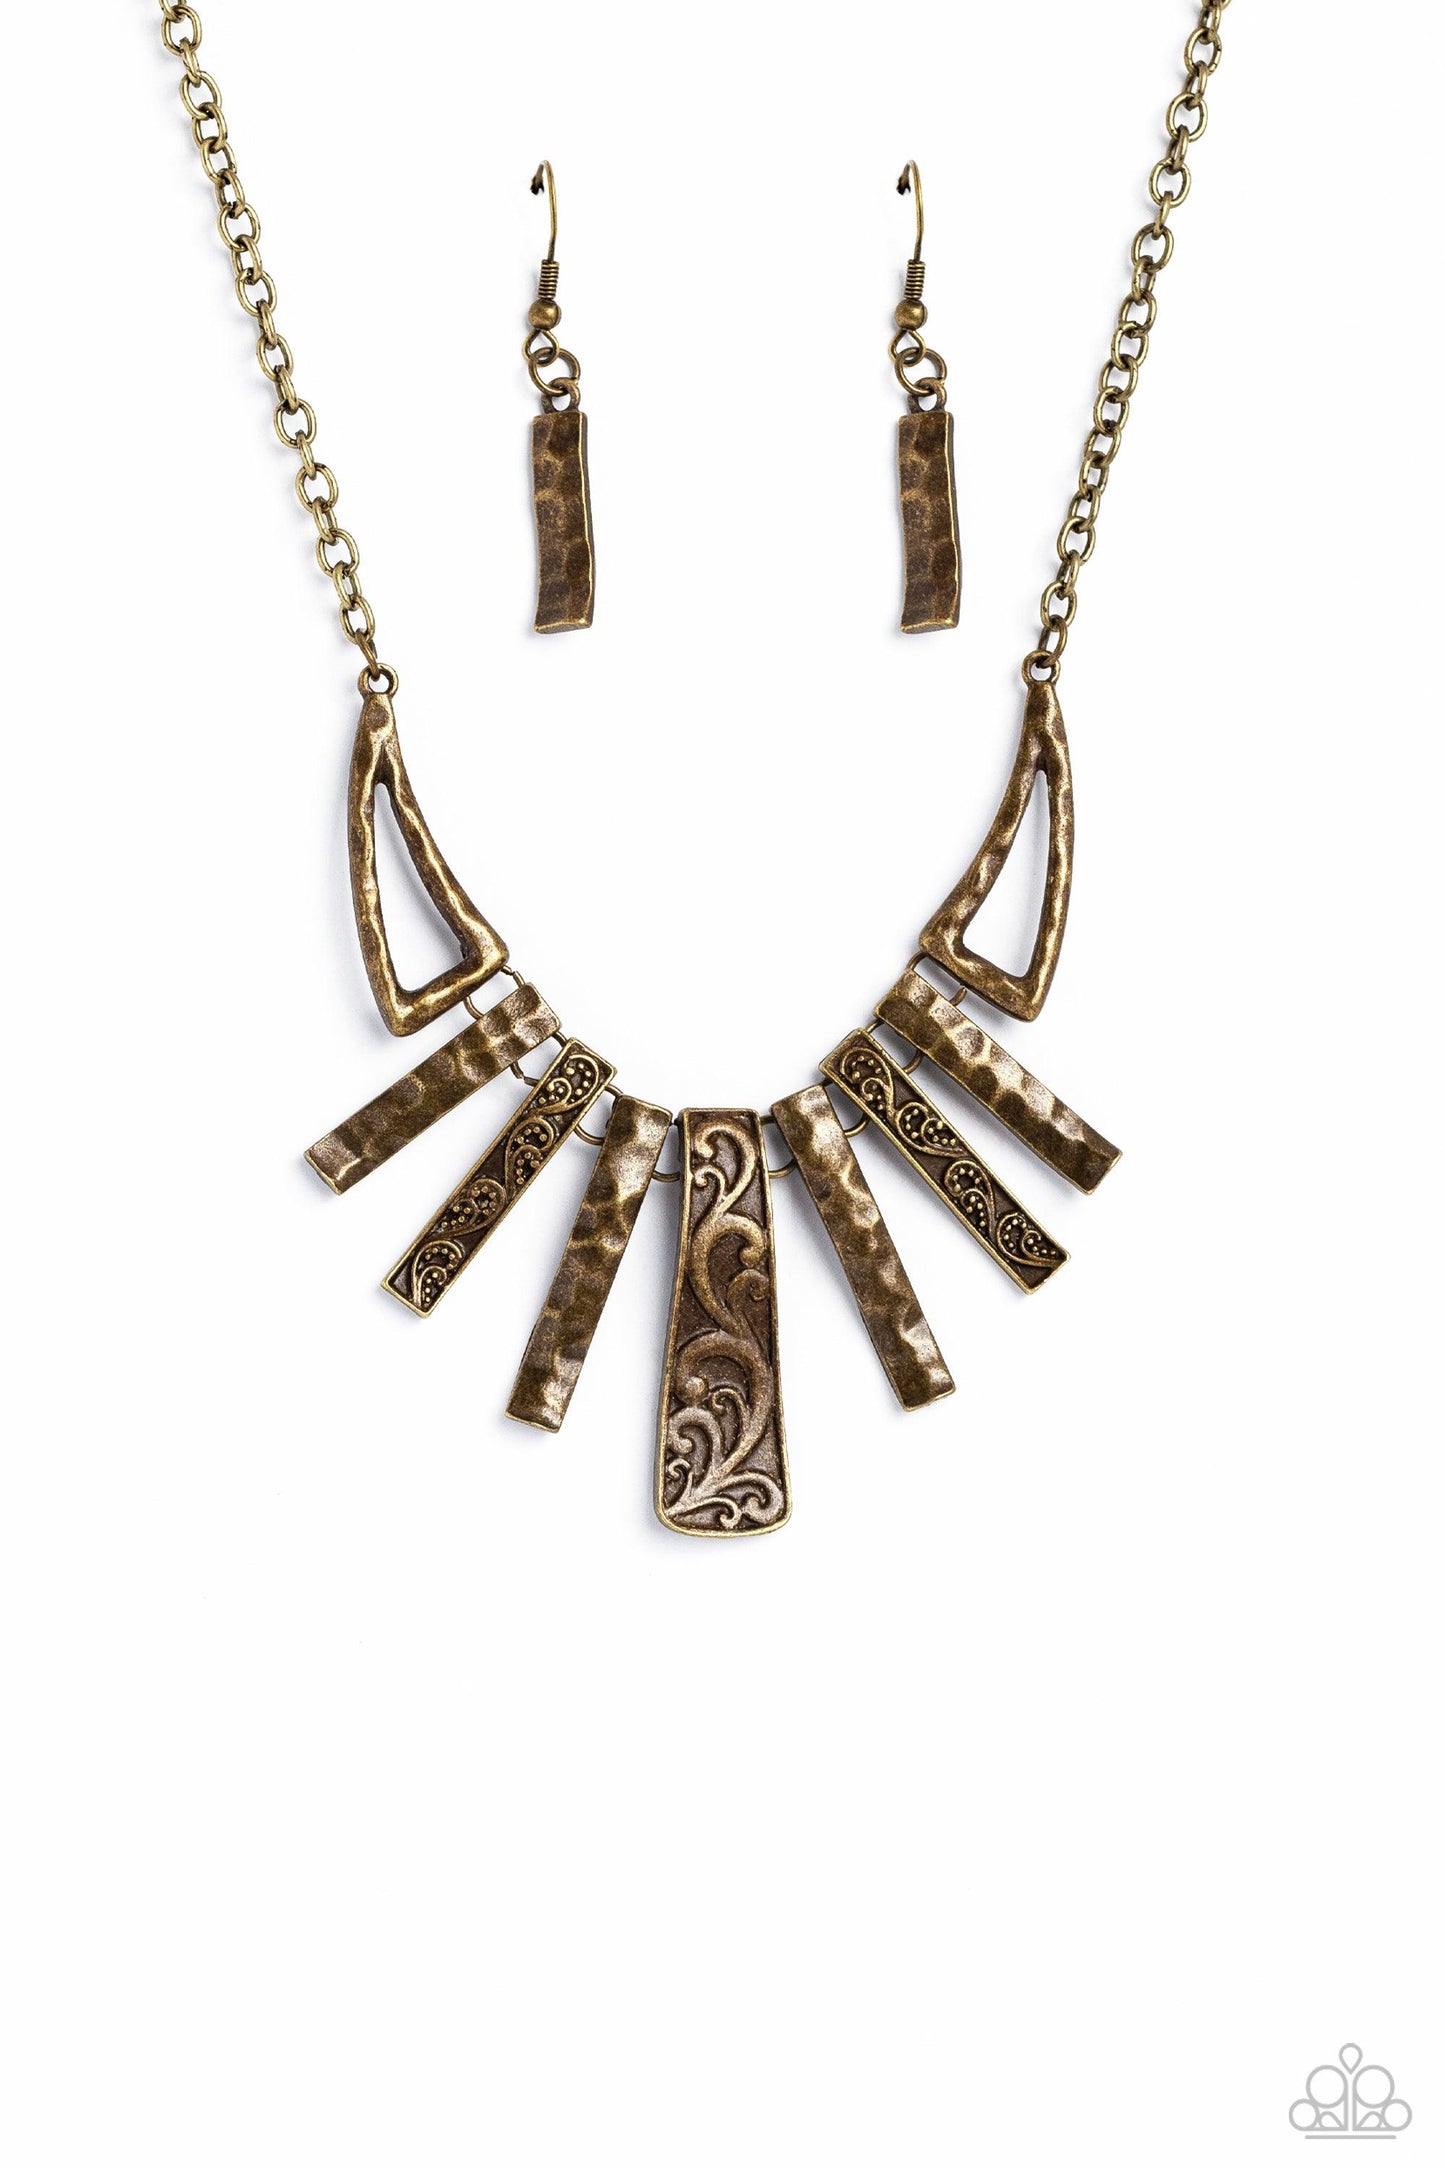 Paparazzi Accessories - Paisley Pastime - Brass Necklace - Bling by JessieK